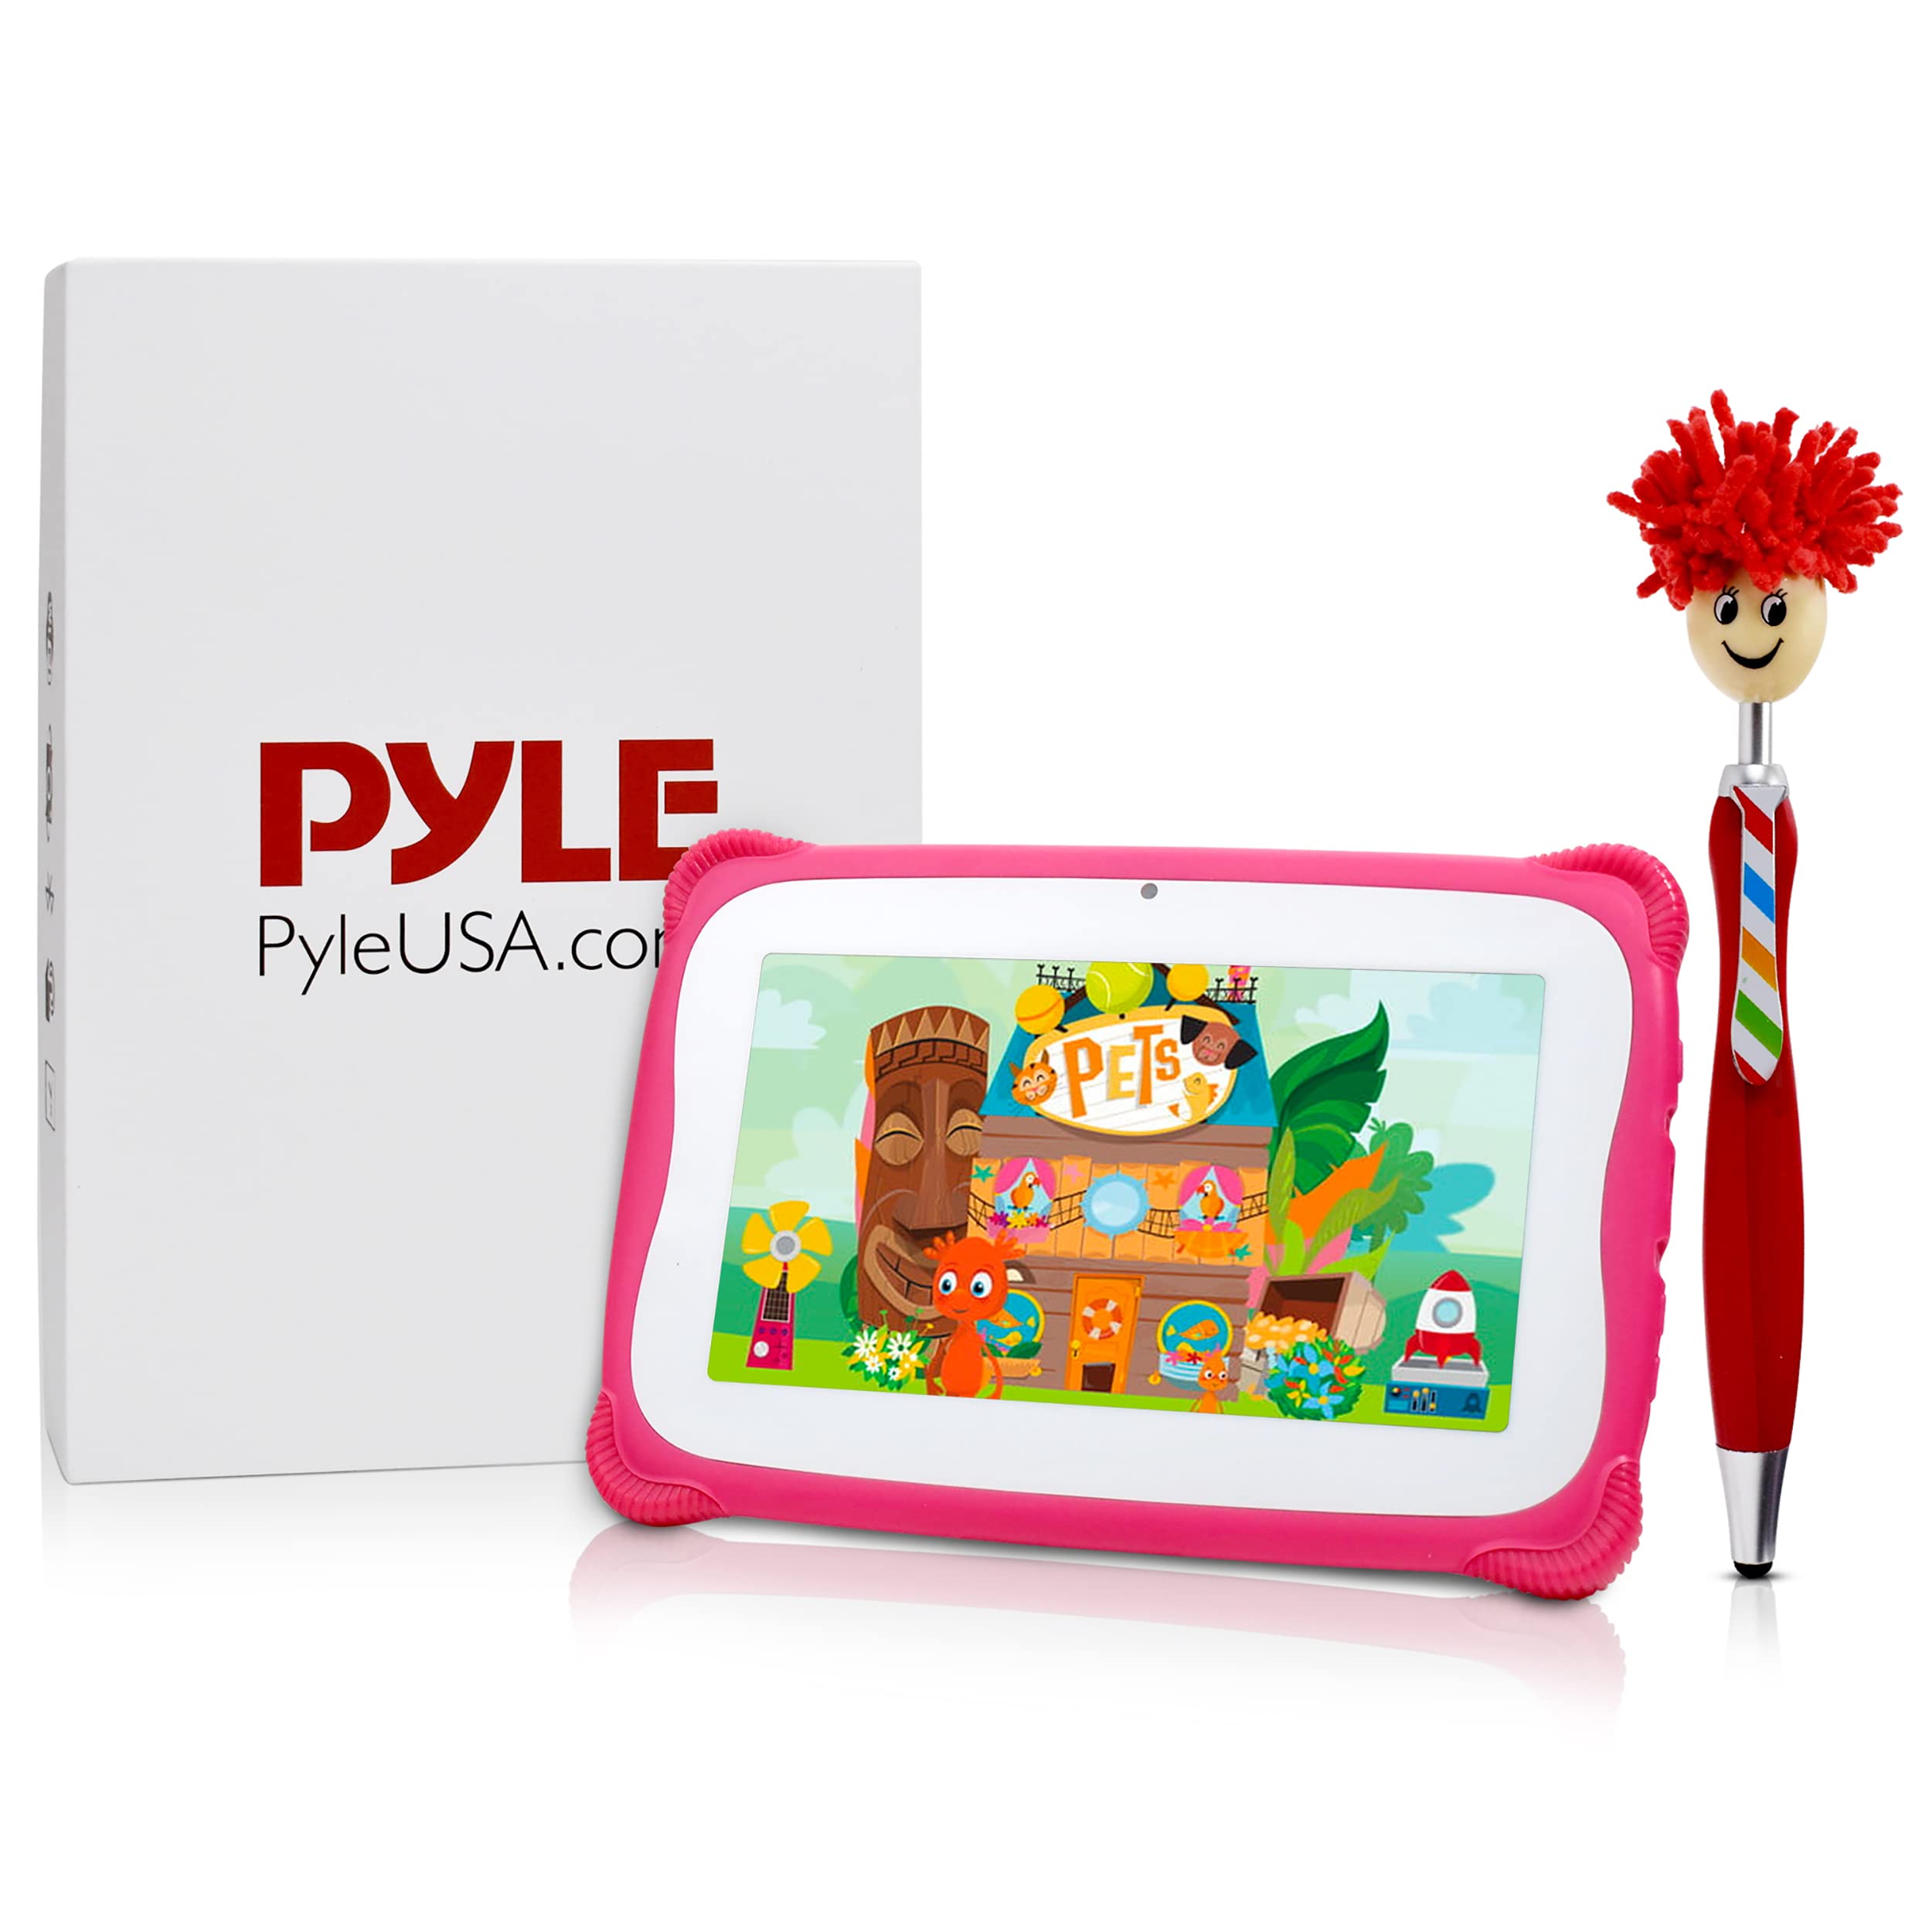 Pyle 7-Inch Android Tablet w/ 1080p HD Display, 7” Kids Tablet w/Stylus Pen Dual Camera, WiFi Compatibility, Quad-Core Processor, 1GB RAM, 8GB Storage, Kid-Proof Cover (Pink)